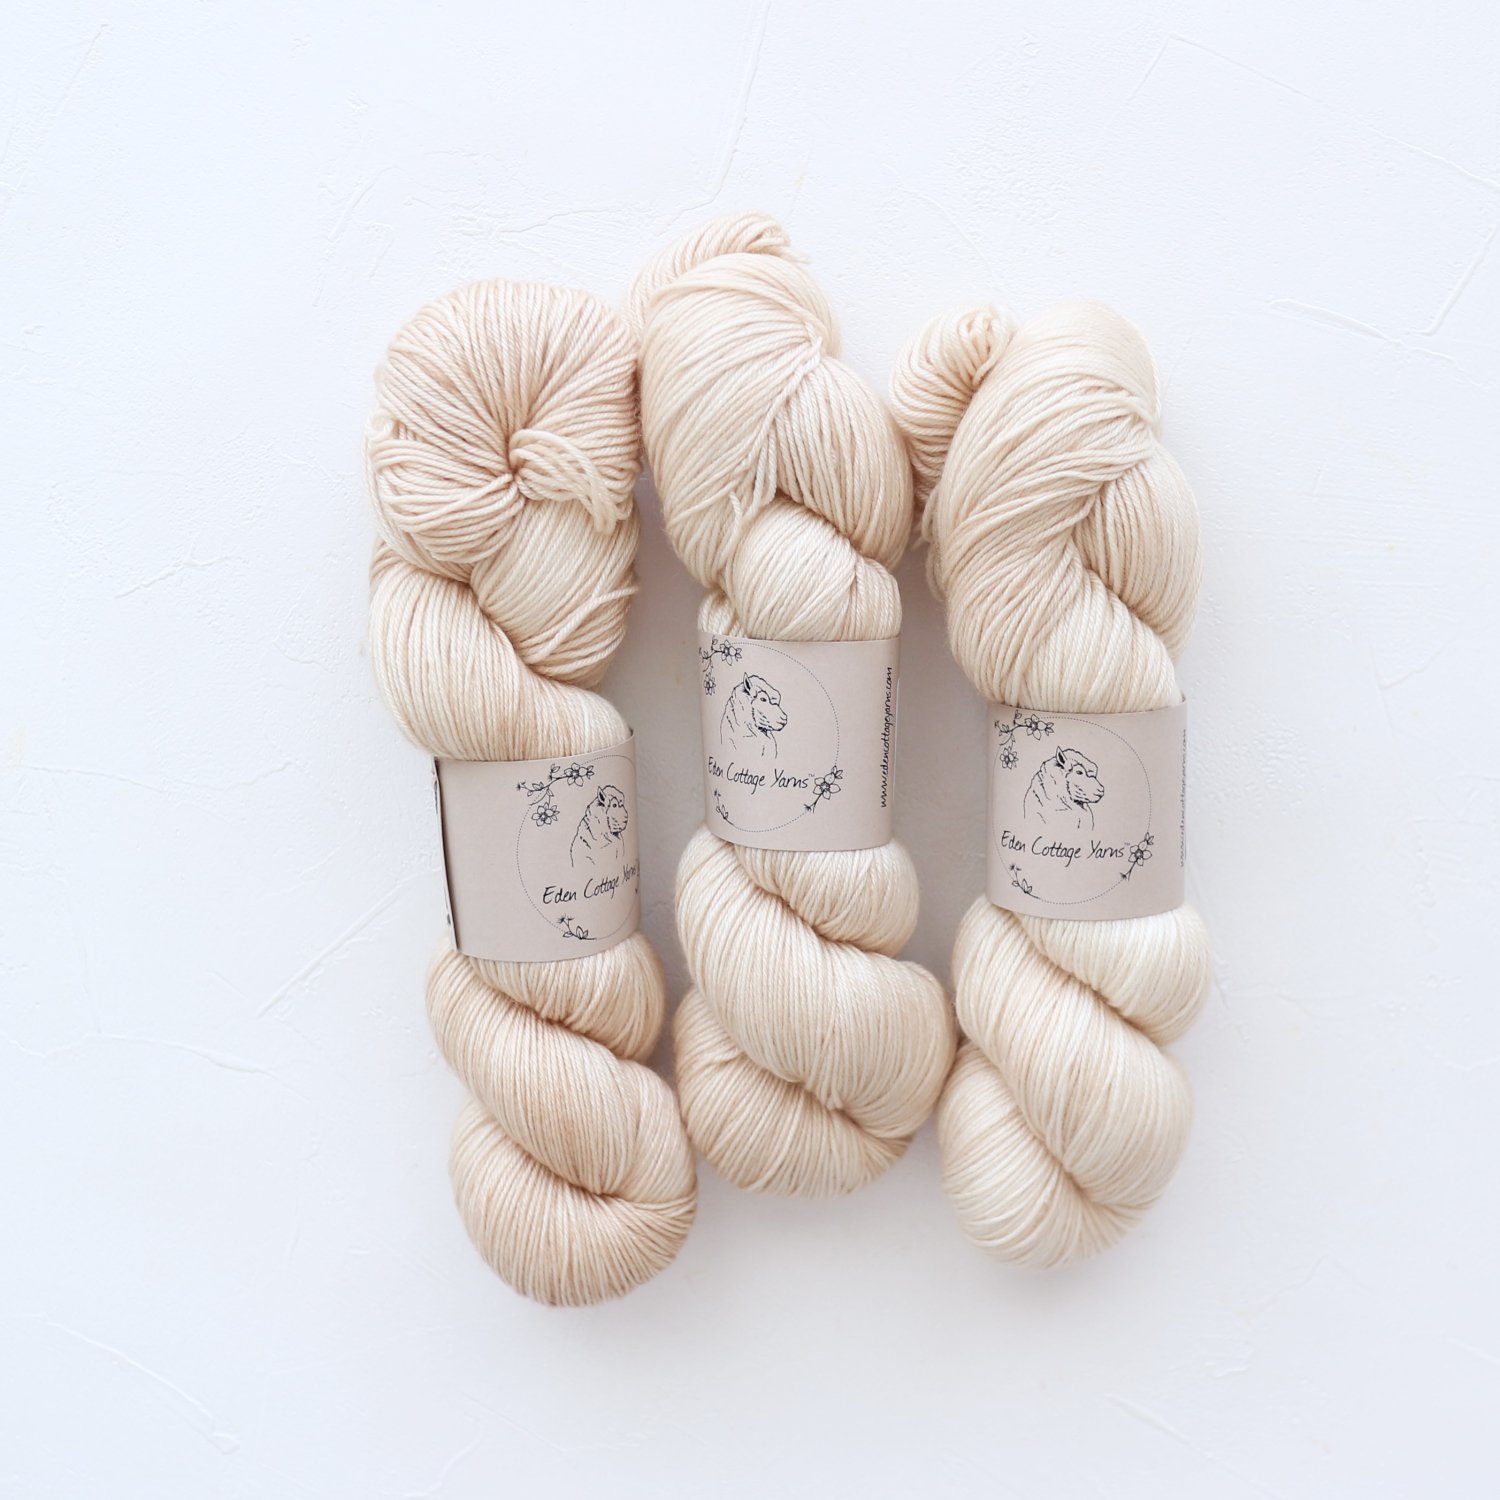 Eden Cottage Yarns<br>Pendle 4ply<br>Whispering Grass